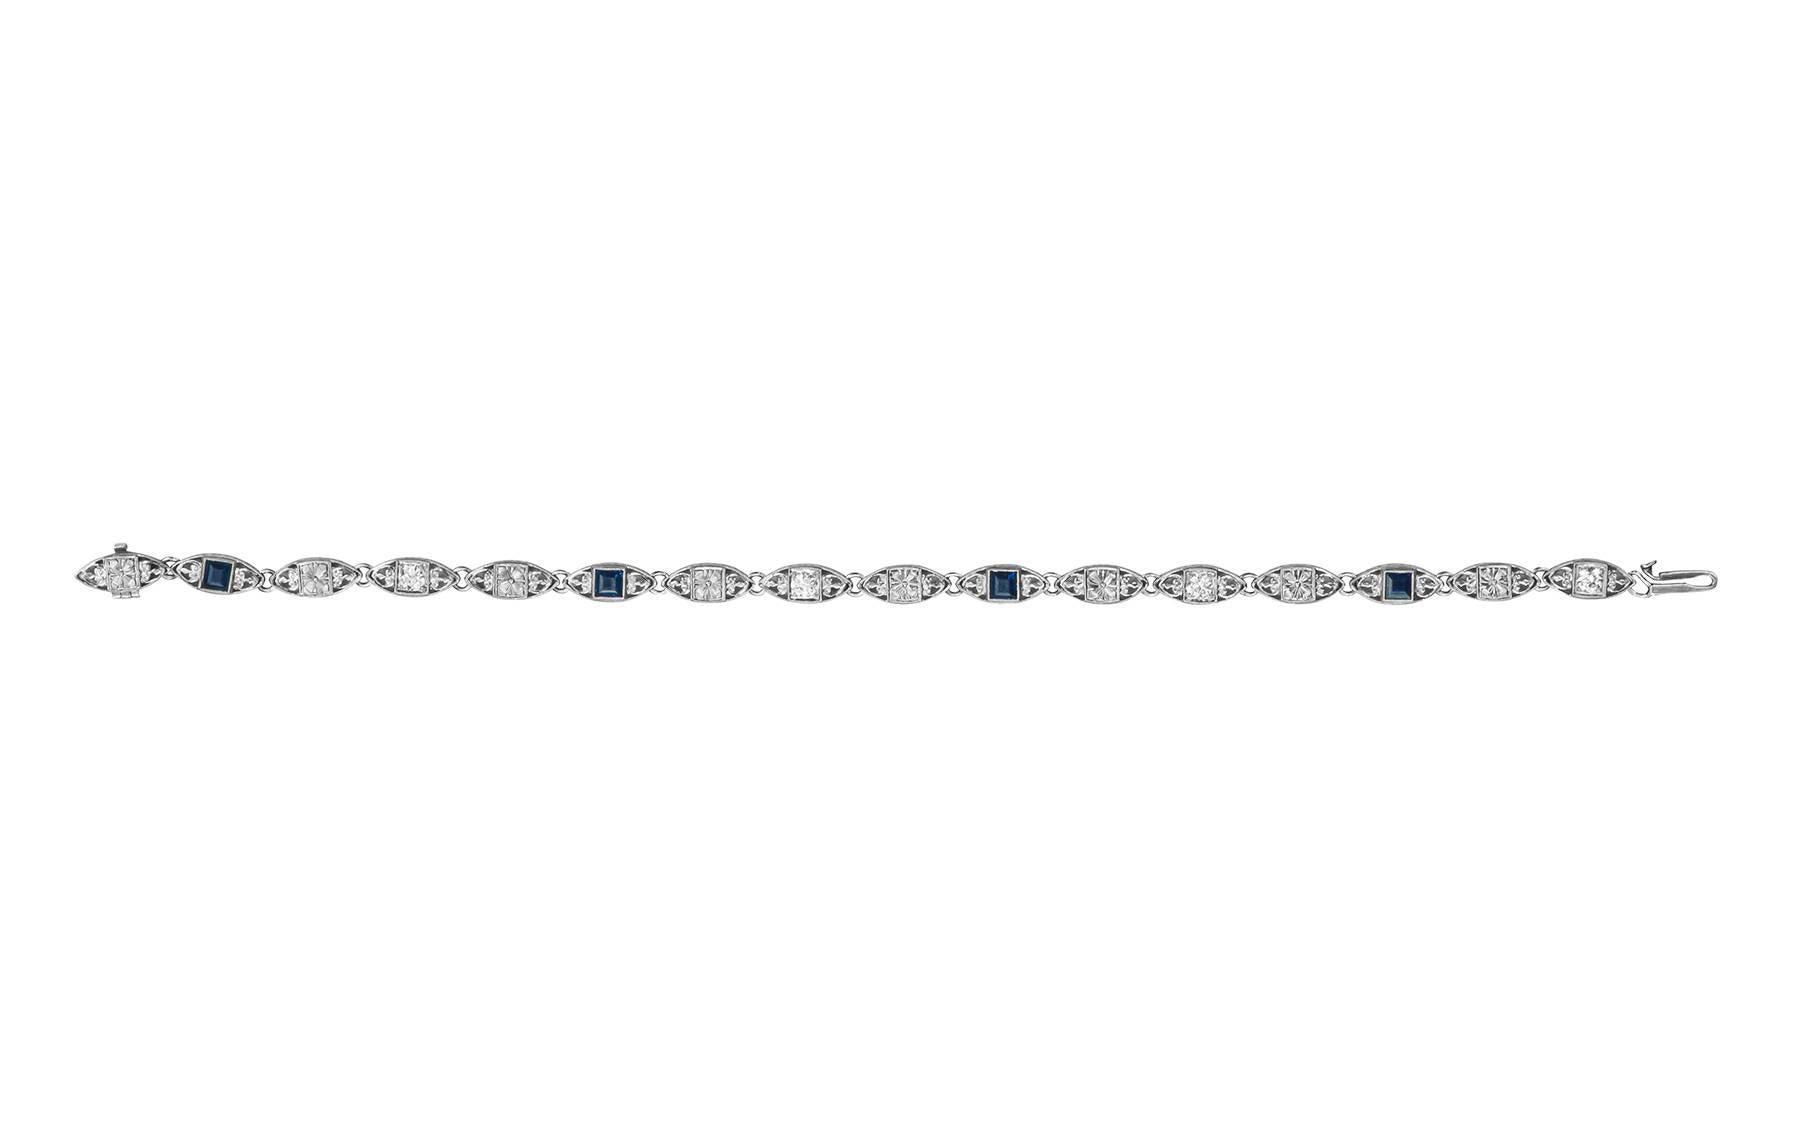 A diamond and sapphire bracelet, made in platinum by Tiffany & Co.  There are four square cut sapphires, bezel set, weighing 0.80cts, and four round brilliant diamonds weighing 0.40cts.  The remaining links without any gemstones have a floral